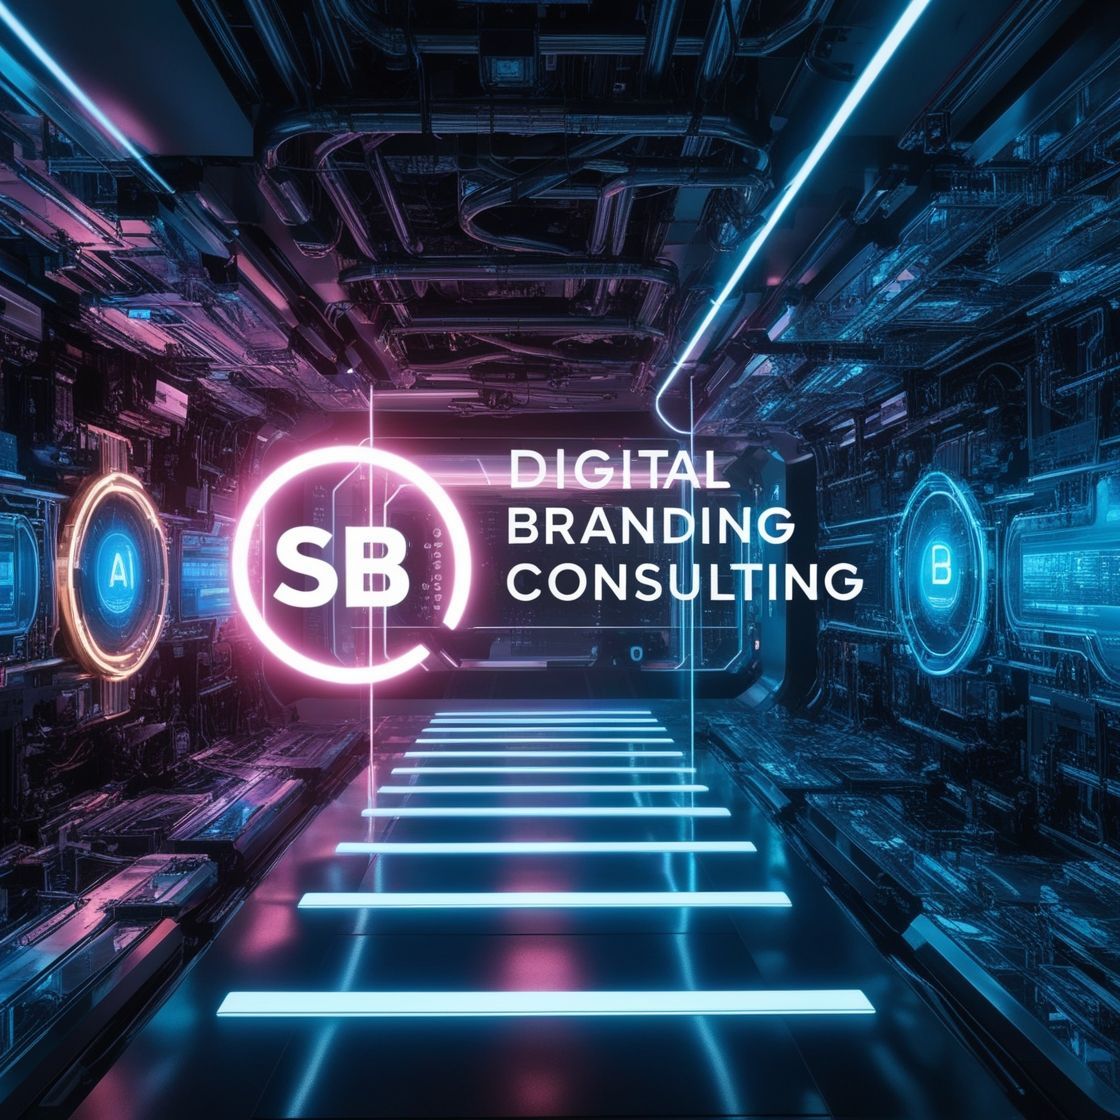 A digital branding consulting logo is displayed in a futuristic hallway